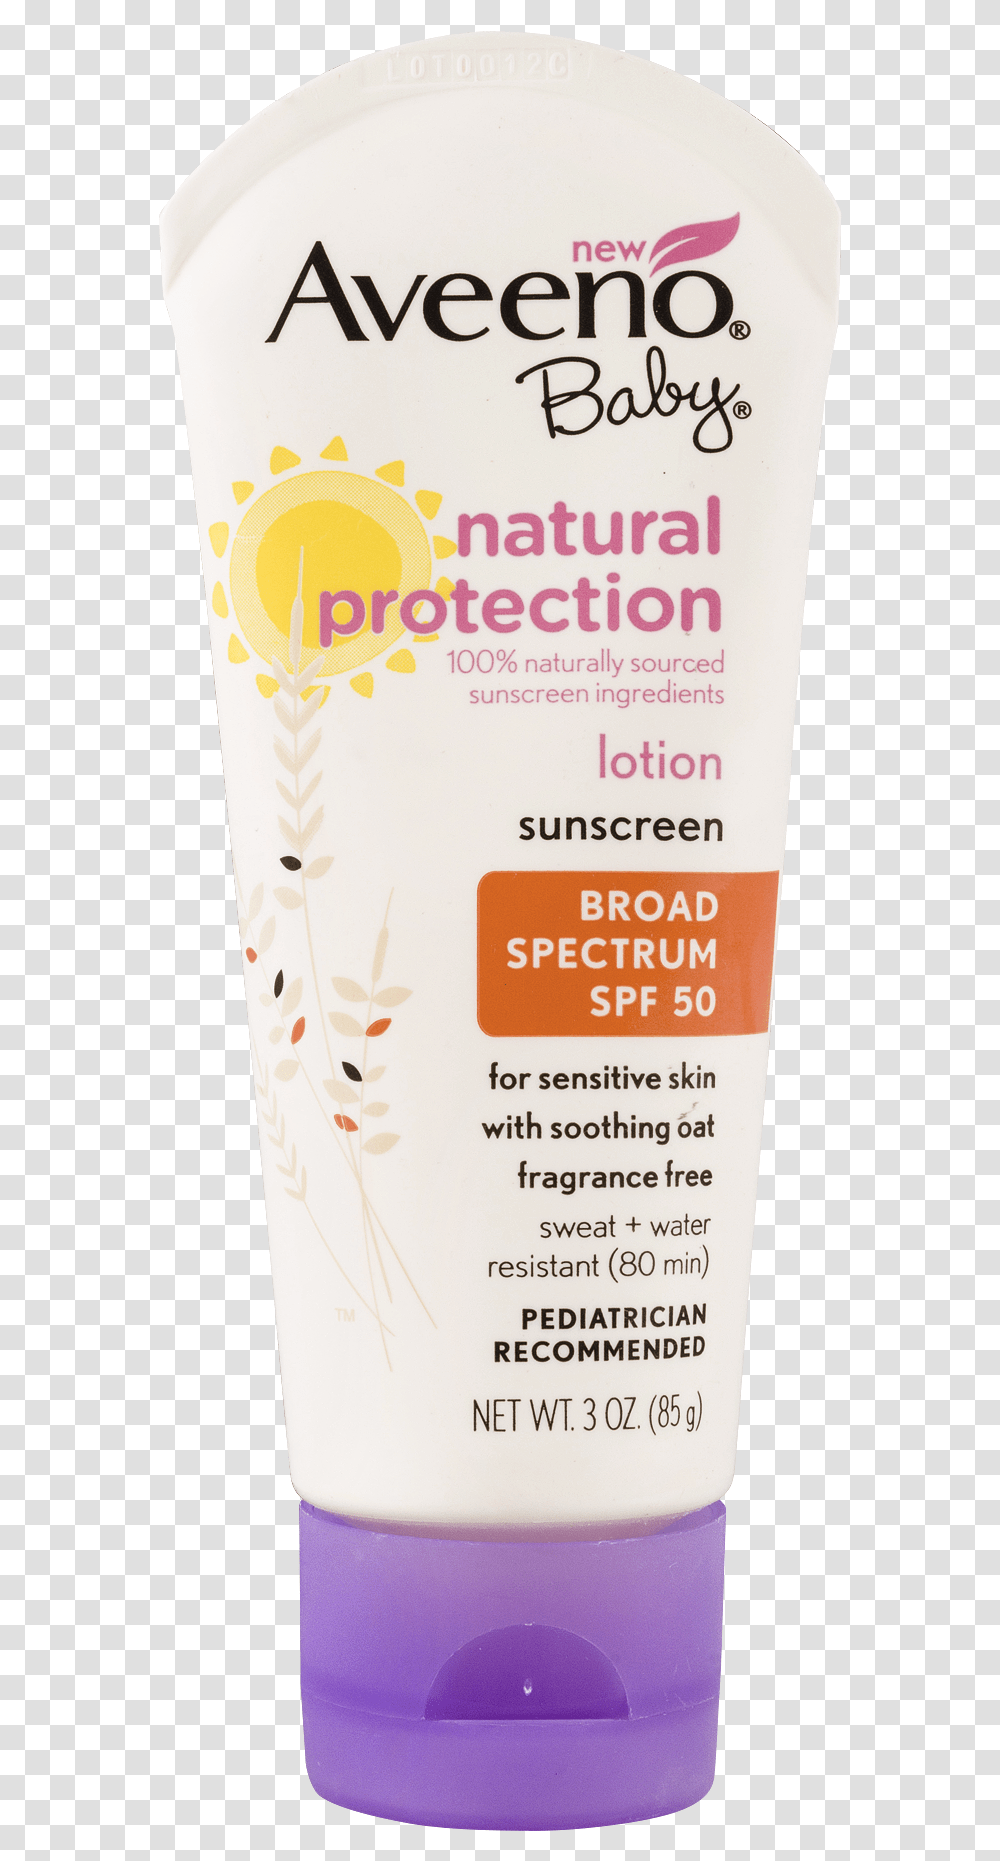 Aveeno Baby Natural Protection Lotion Sunscreen, Cosmetics, Bottle, Beer, Alcohol Transparent Png